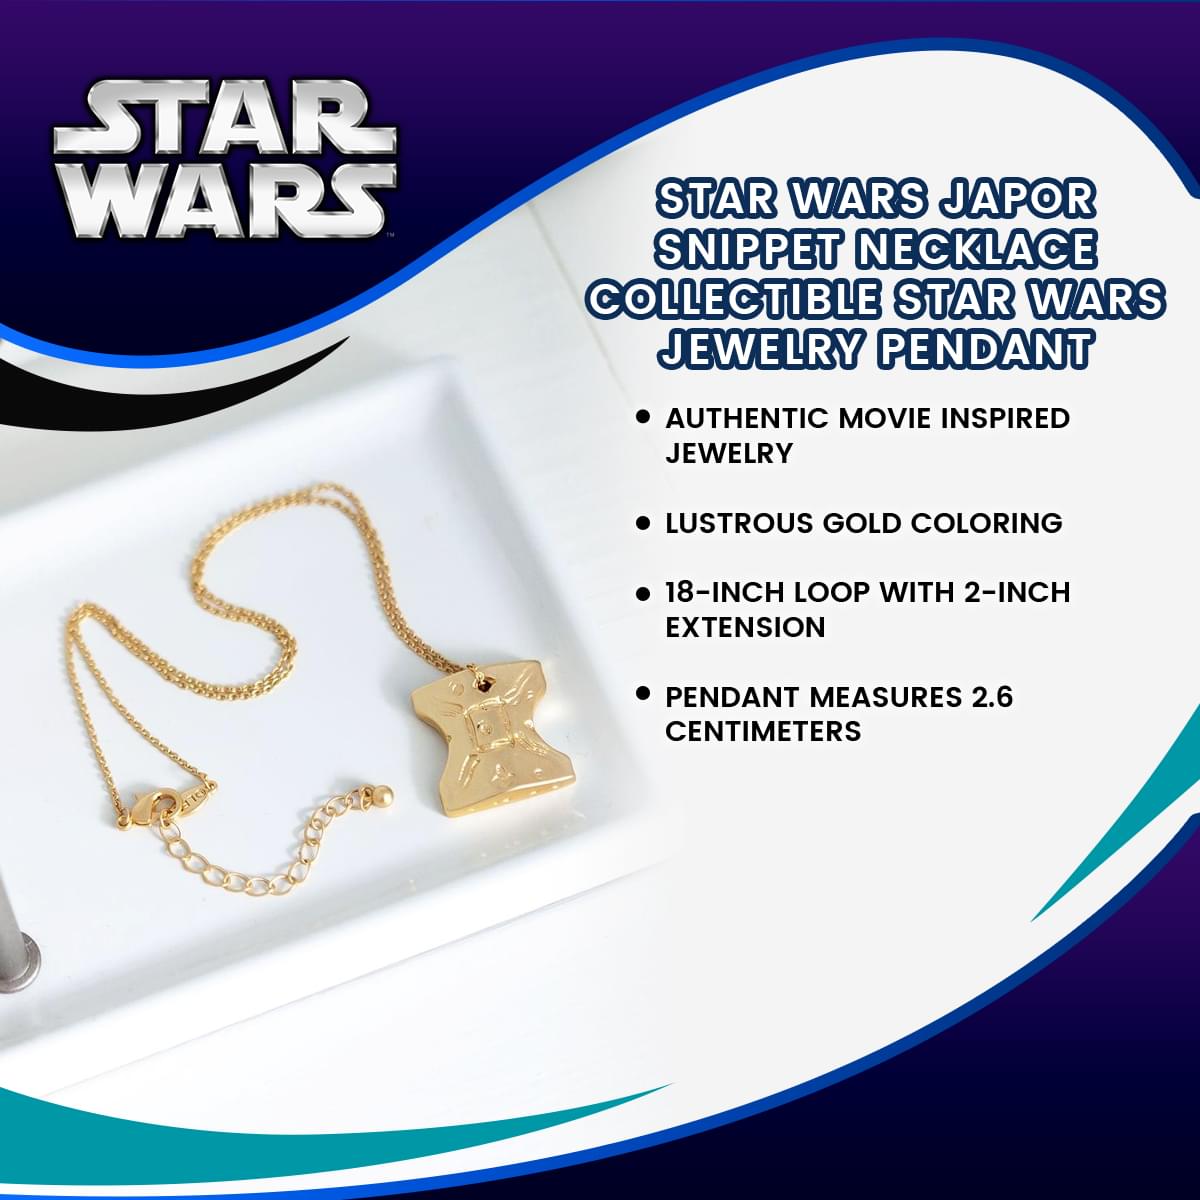 Star Wars Japor Snippet Necklace | Collectible Star Wars Jewelry Pendant